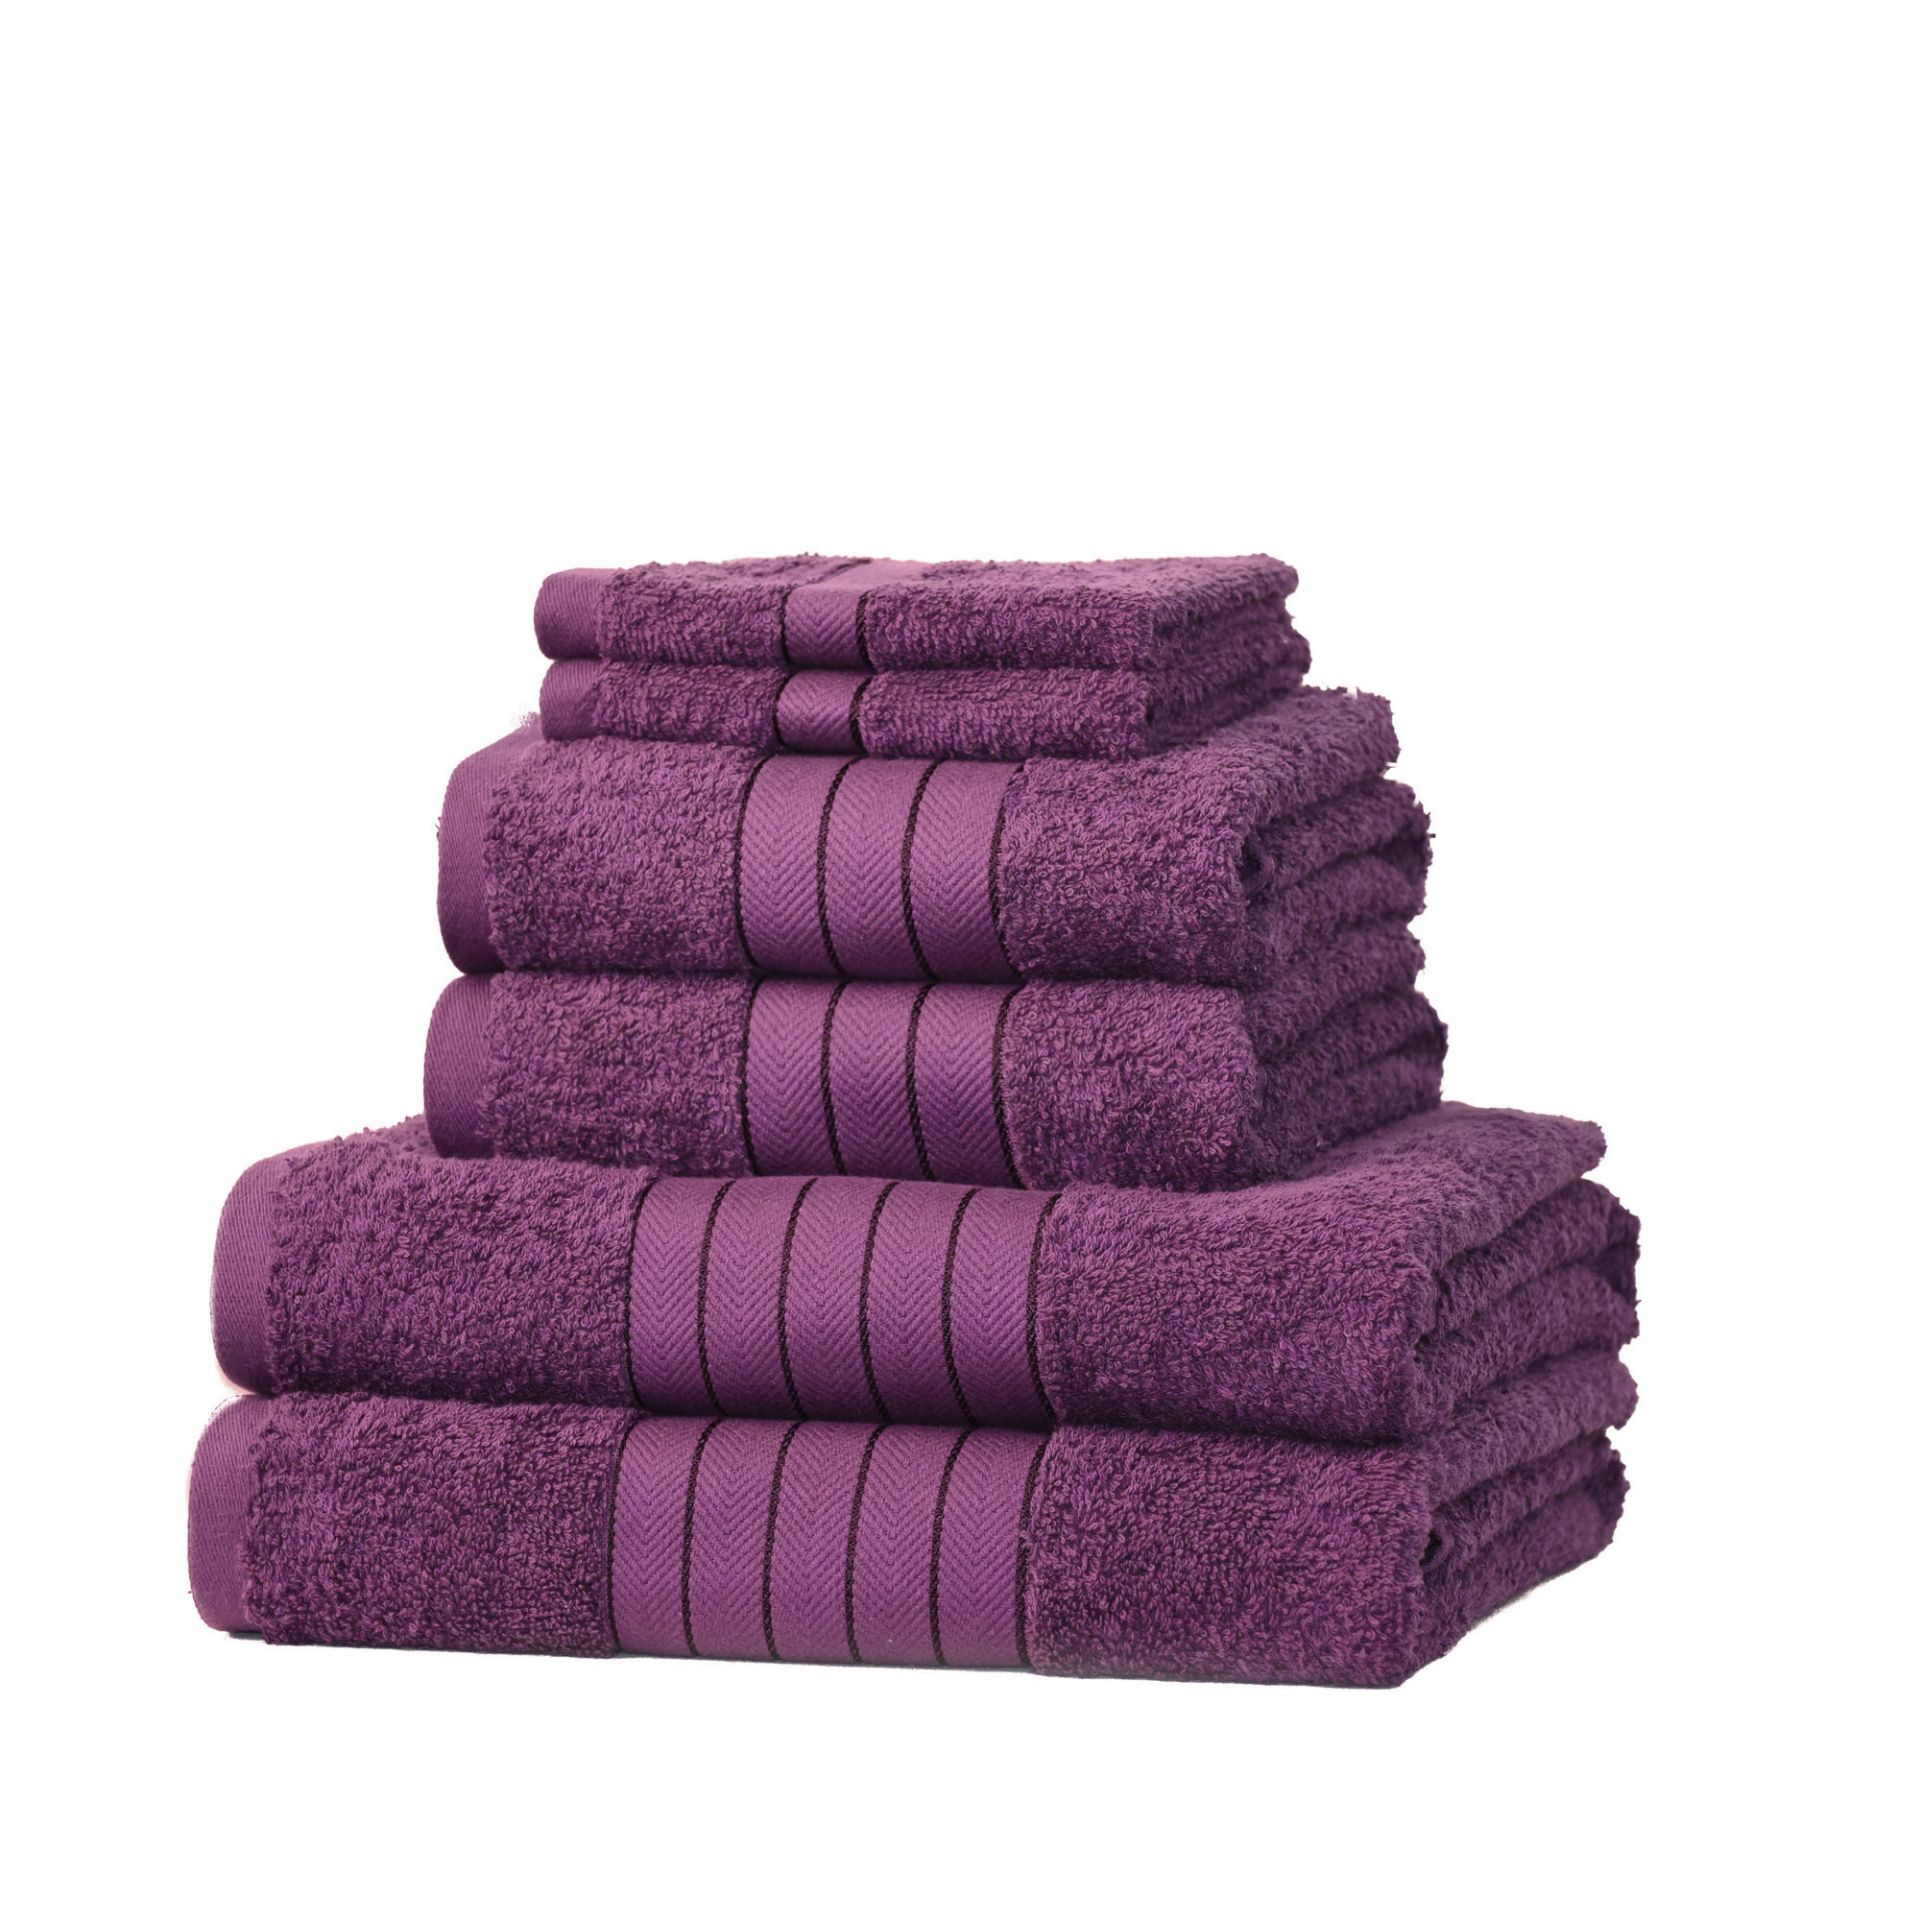 V Brand New Aubergine 6 Piece Towel Bale Set With 2 Face Towels - 2 Hand Towels - 1 Bath Sheet - 1